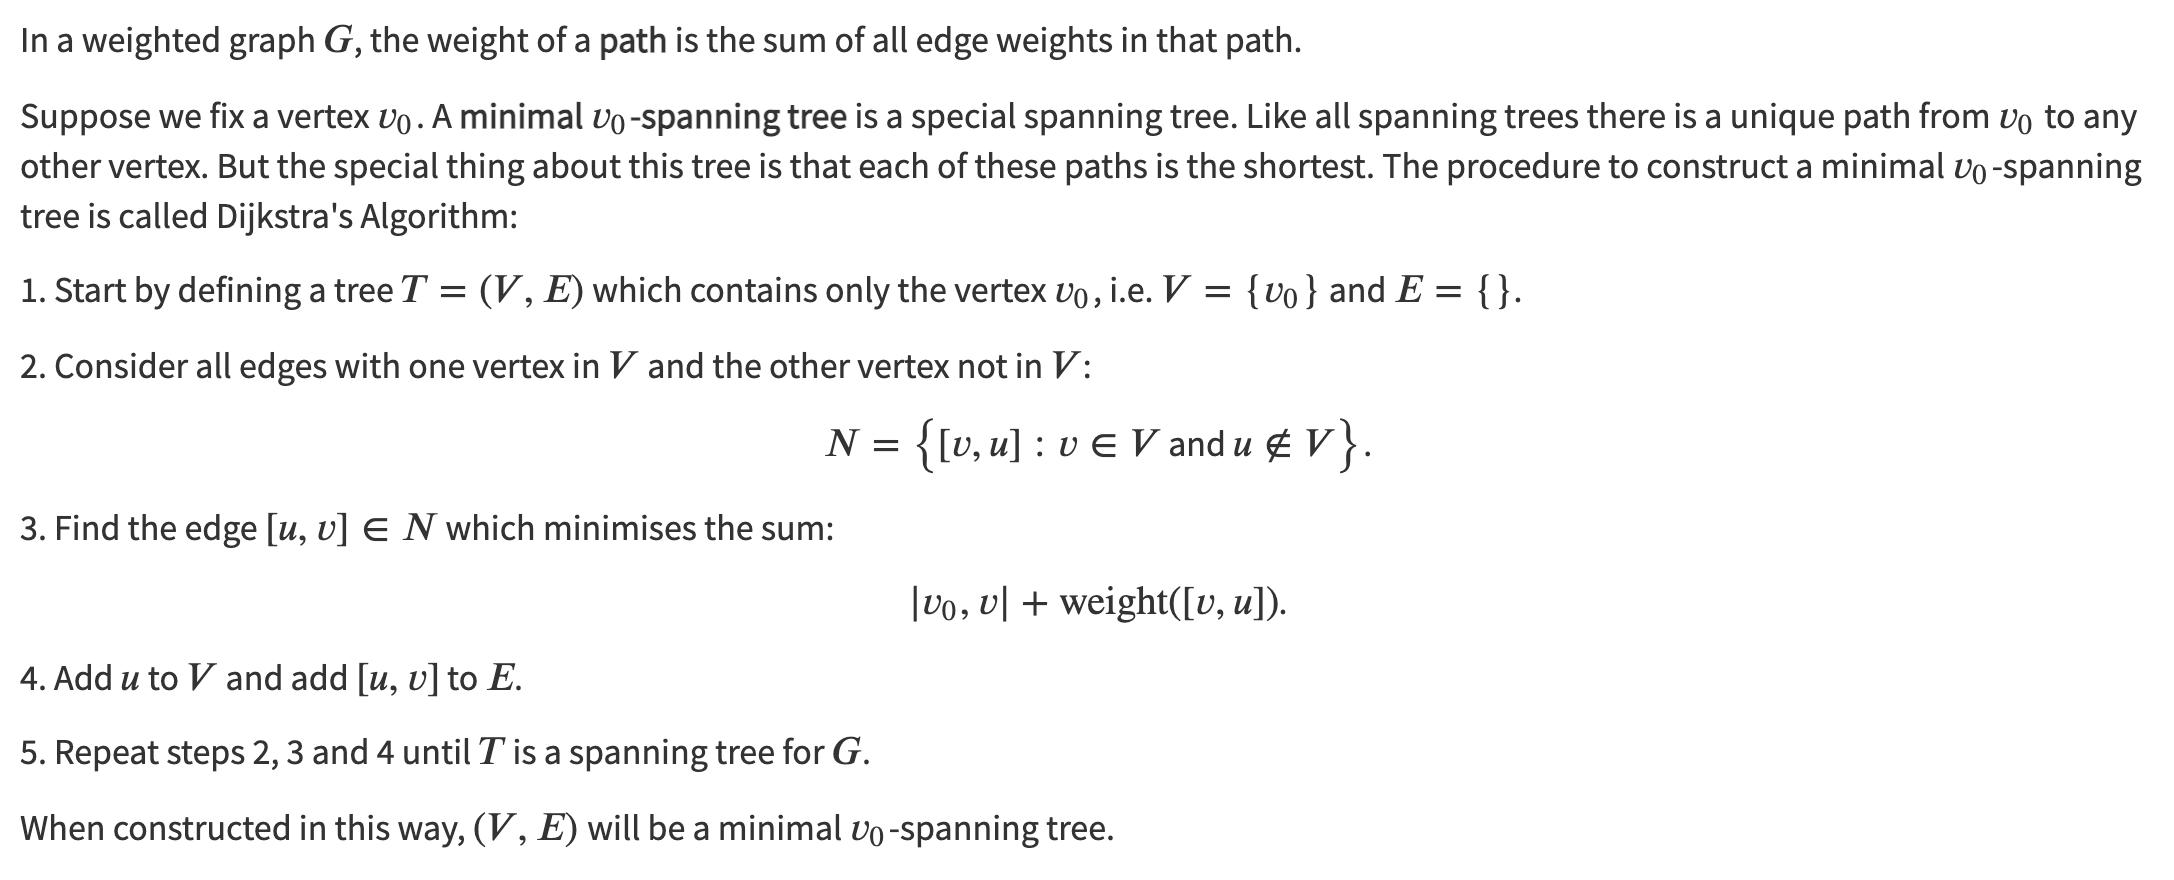 In a weighted graph G, the weight of a path is the sum of all edge weights in that path.Suppose we fix a vertex vo. A minima